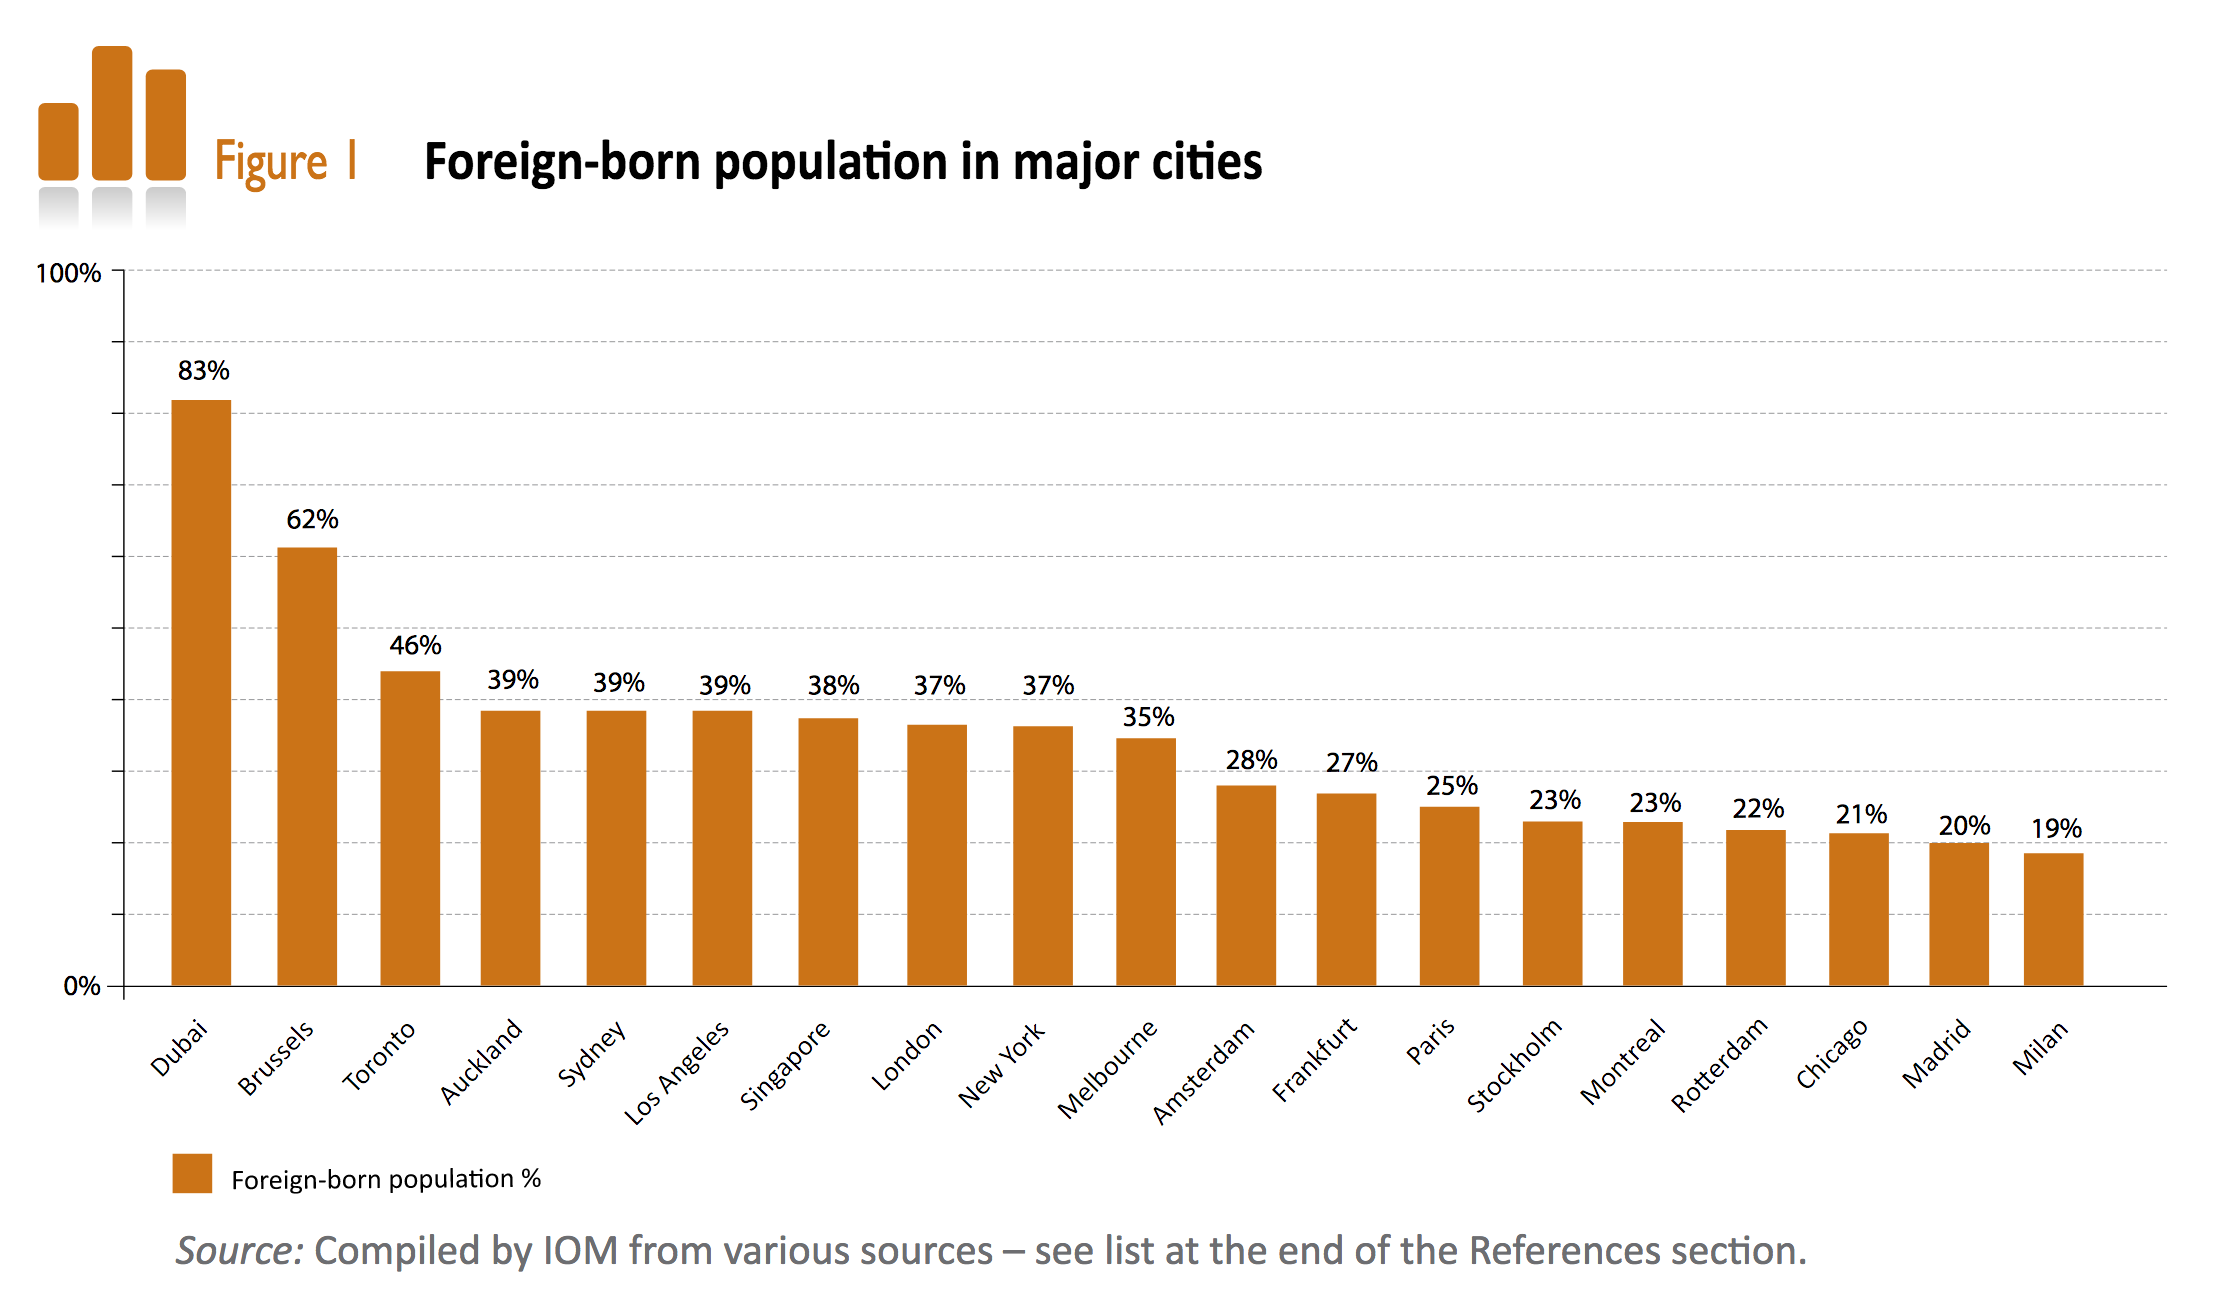 A vertical bar chart titled 'Foreign-born population in major cities, with Brussels as the second highest value (62%) only behind Dubai'